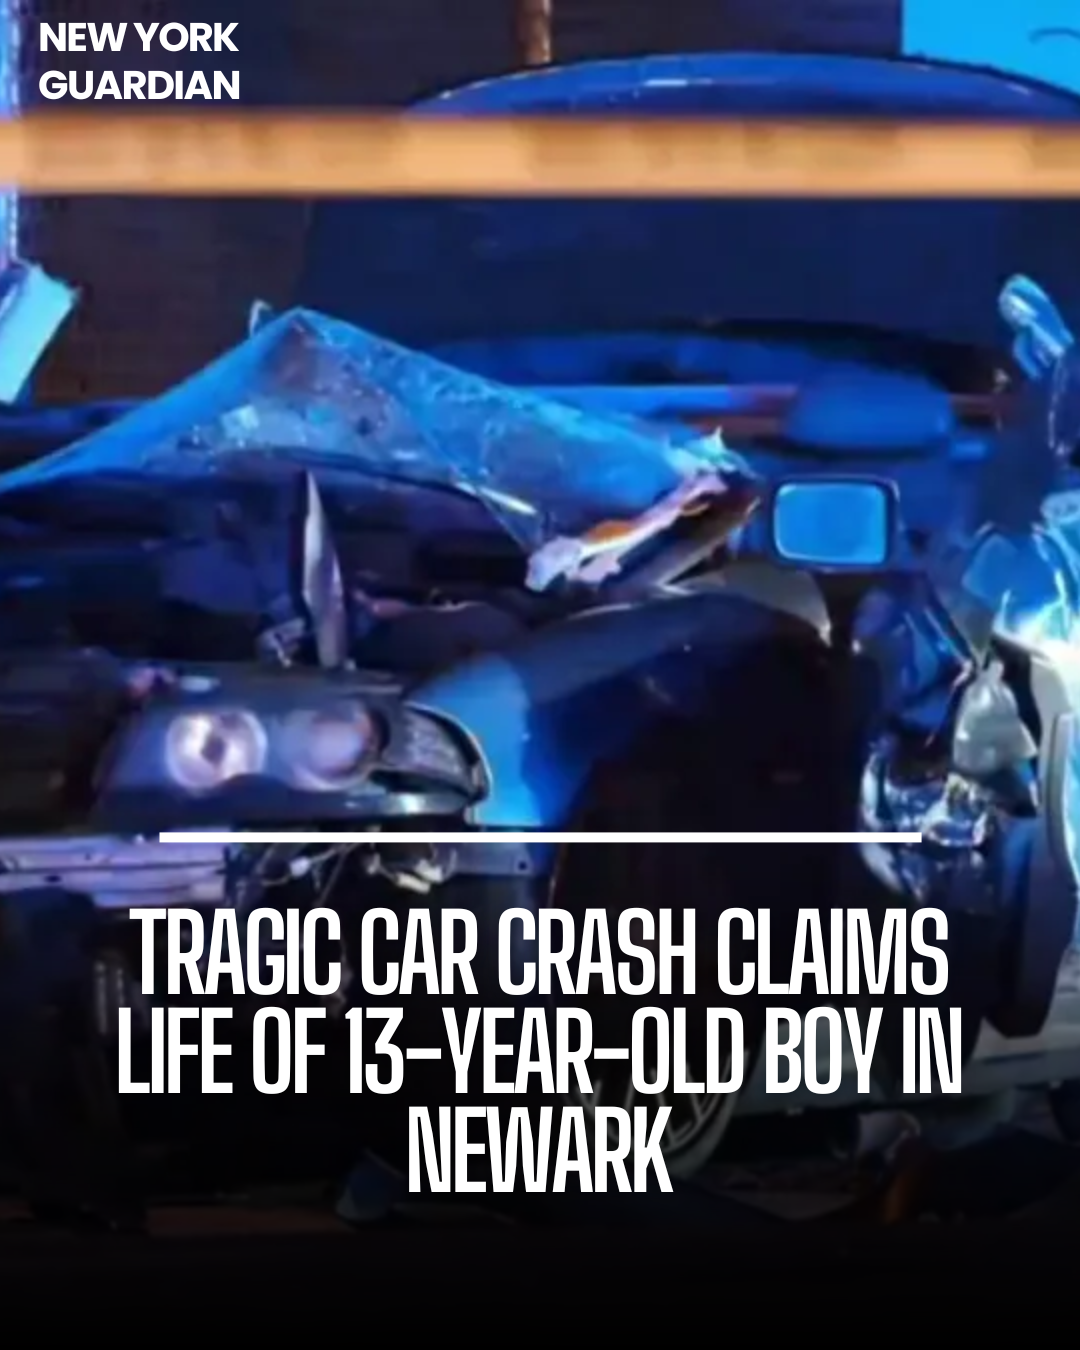 A 13-year-old kid died in a terrible vehicle crash in Newark over the weekend.